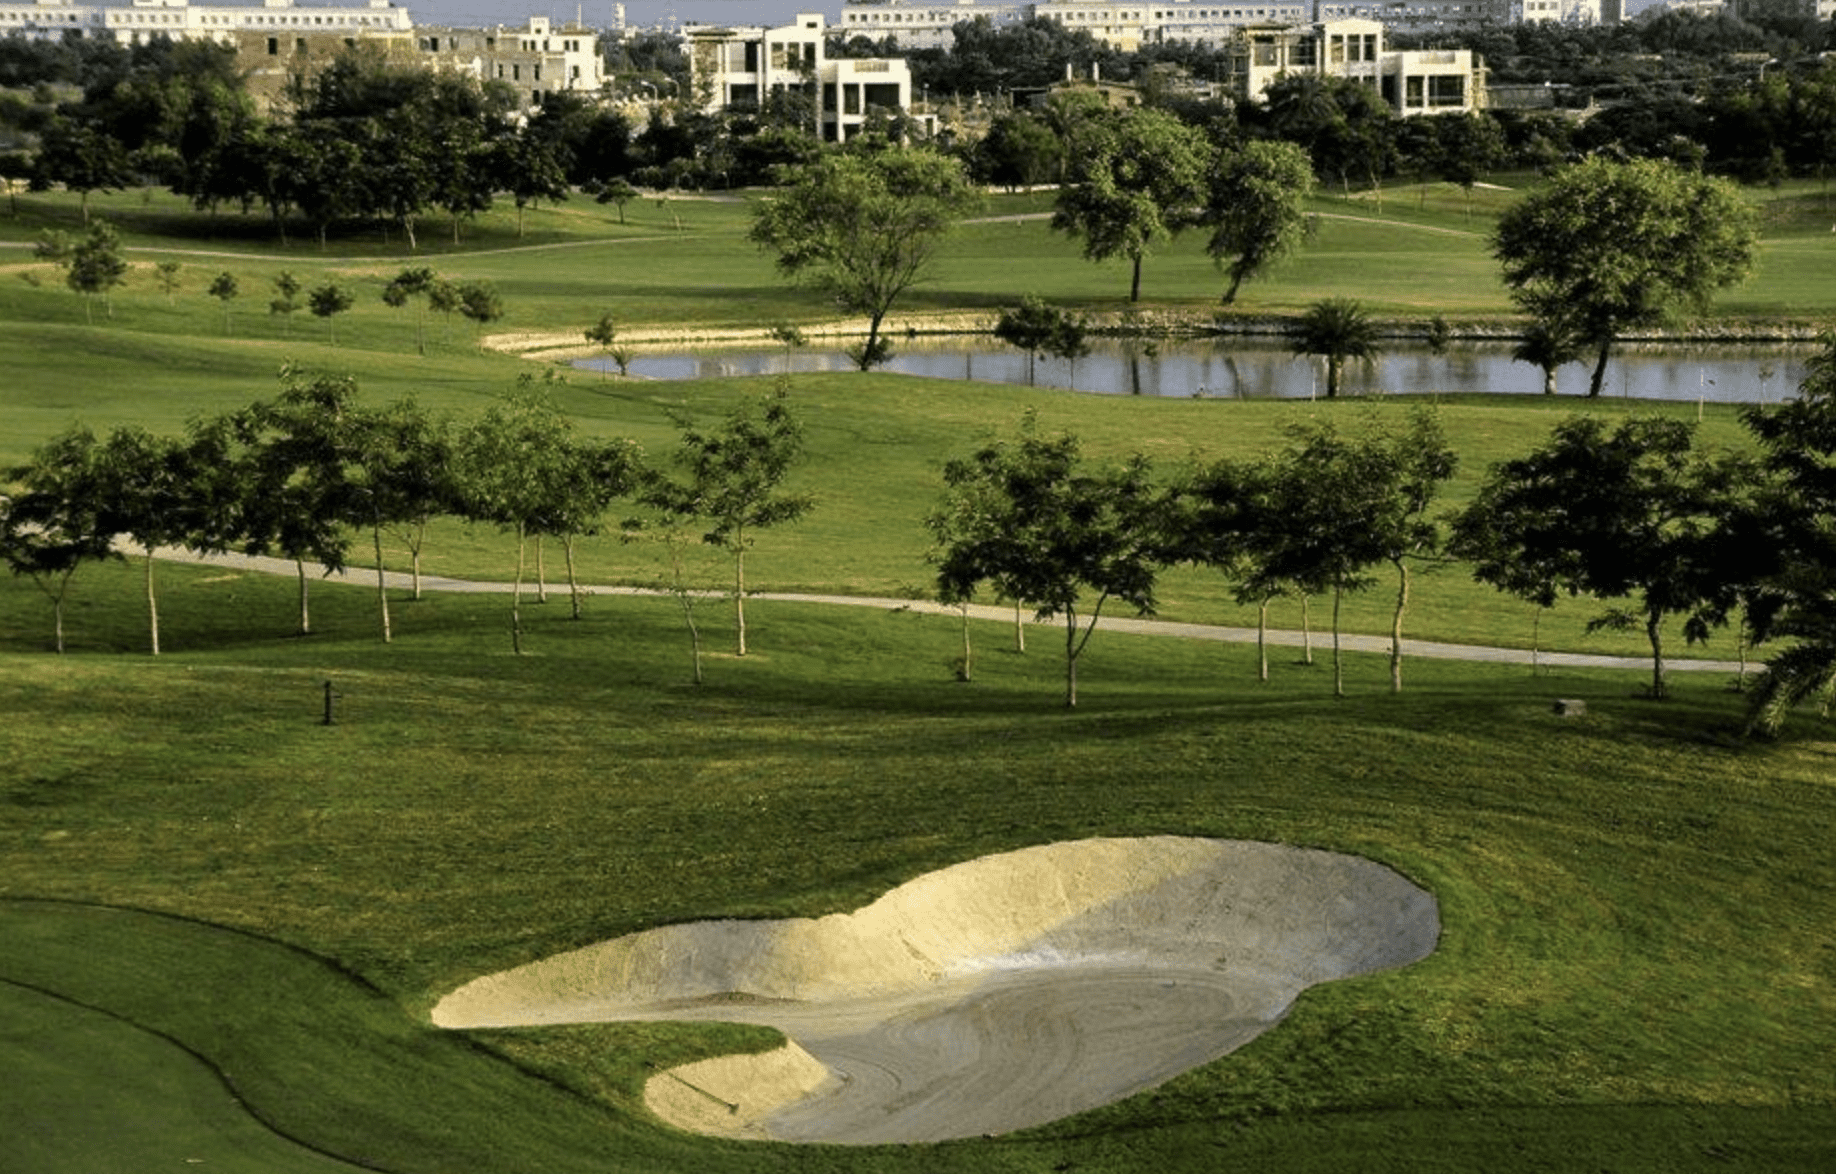 best golf courses in New Delhi India - Jaypee Gardens has gorgeous views with manicured sand traps and highrise buildings surrounding holes.